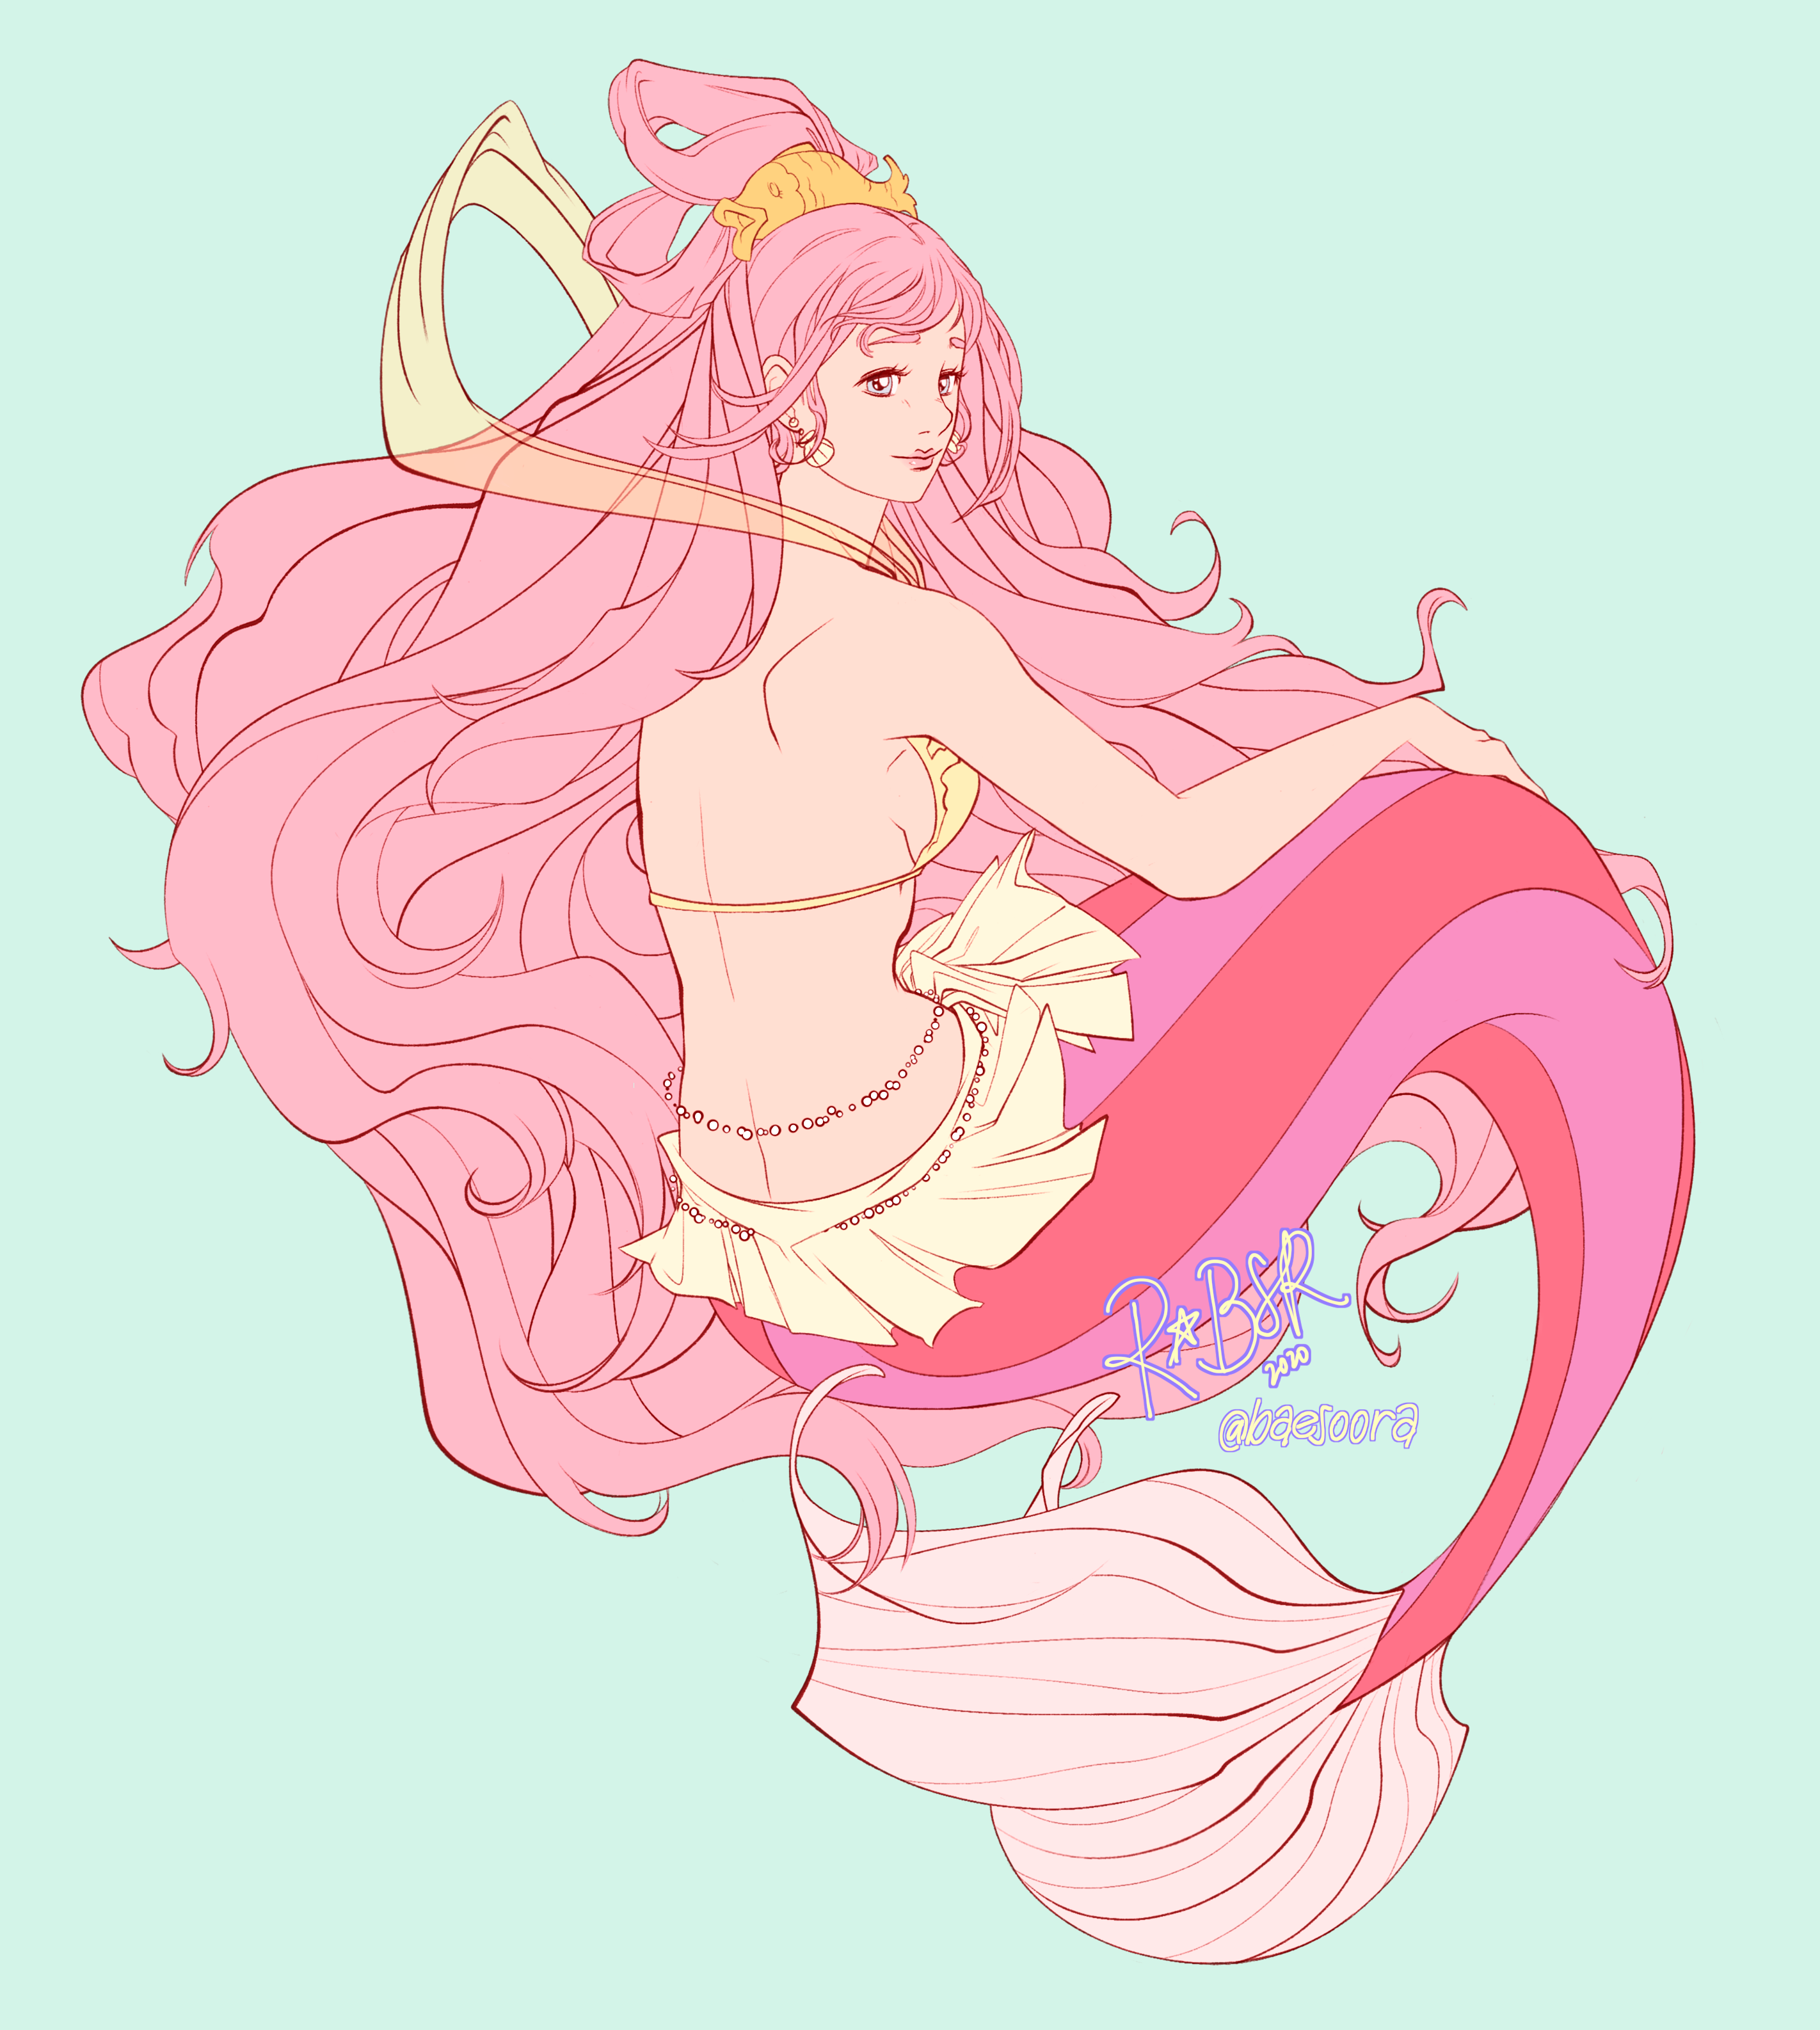 Always wanted to draw Shirahoshi for Mermay, I finally did it